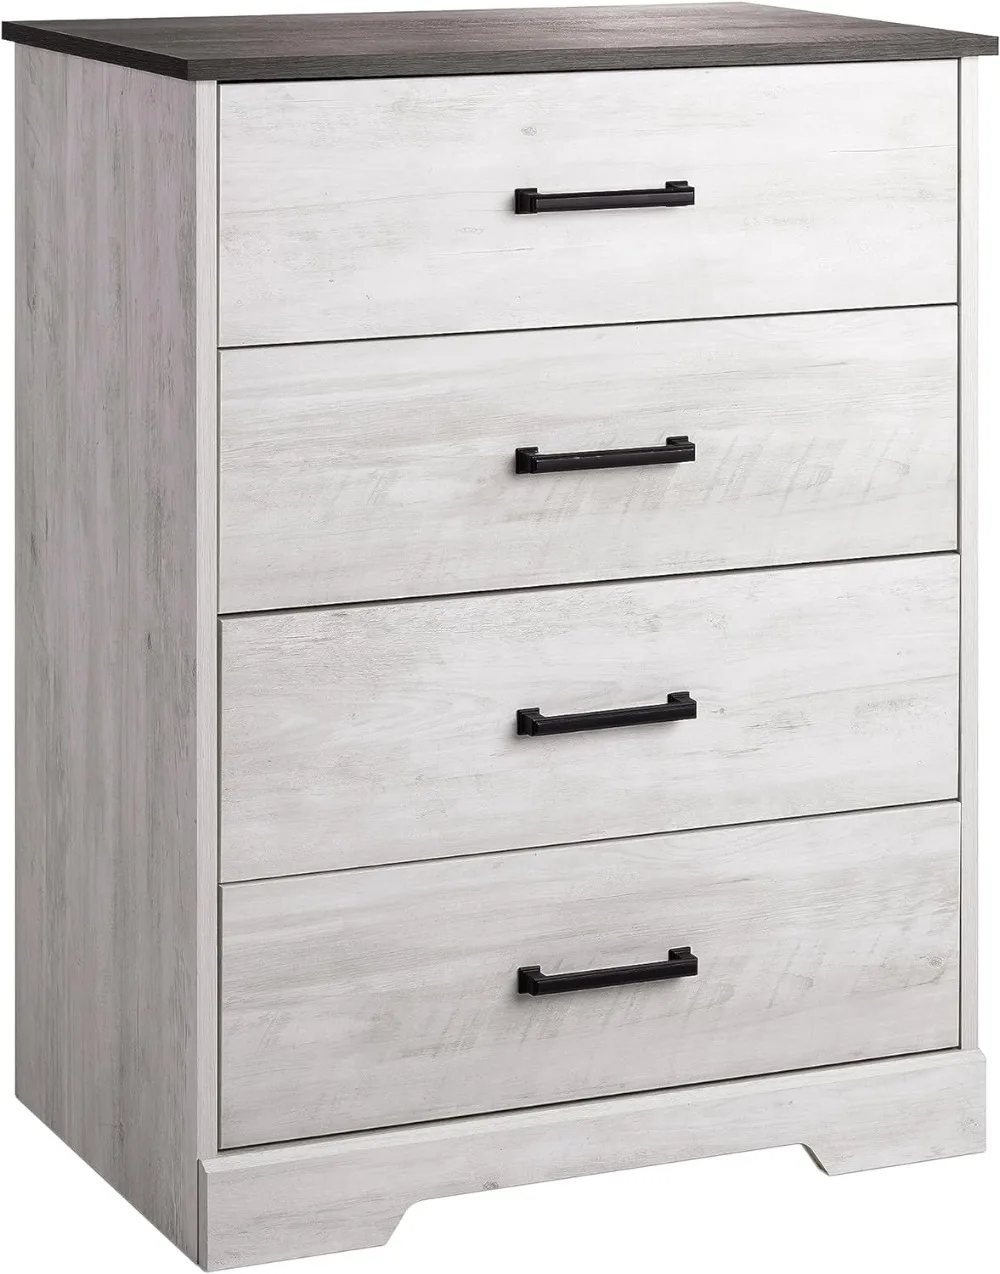 

Prepac Rustic Ridge Farmhouse Chest, Wooden Bedroom Dresser with 4 Storage Drawers, 18.25in x 27.5in x 35.5in, Washed White